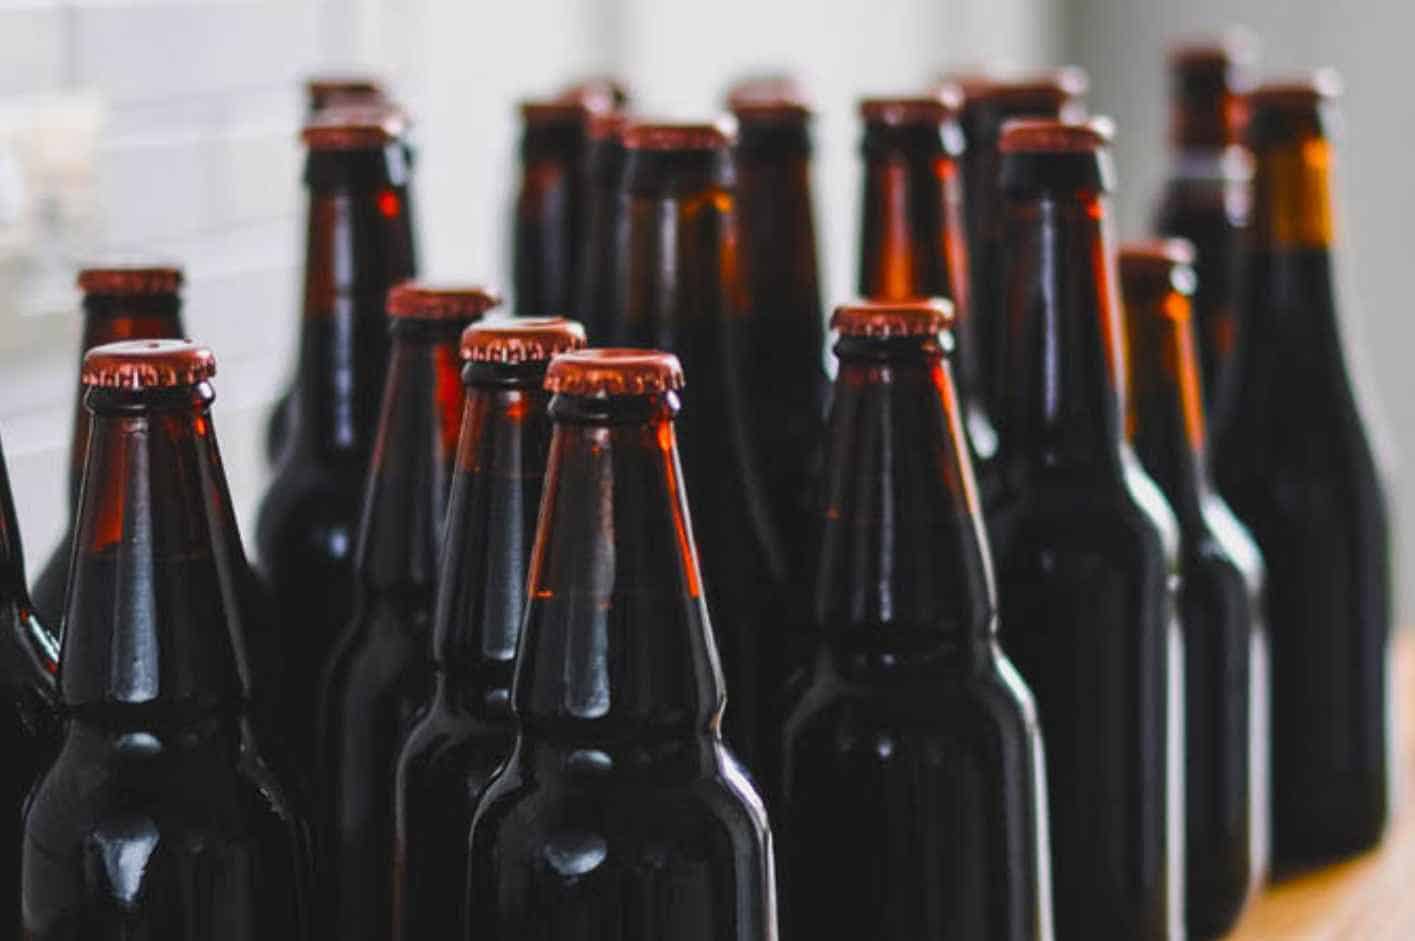 Why Beer Bottles Are Brown